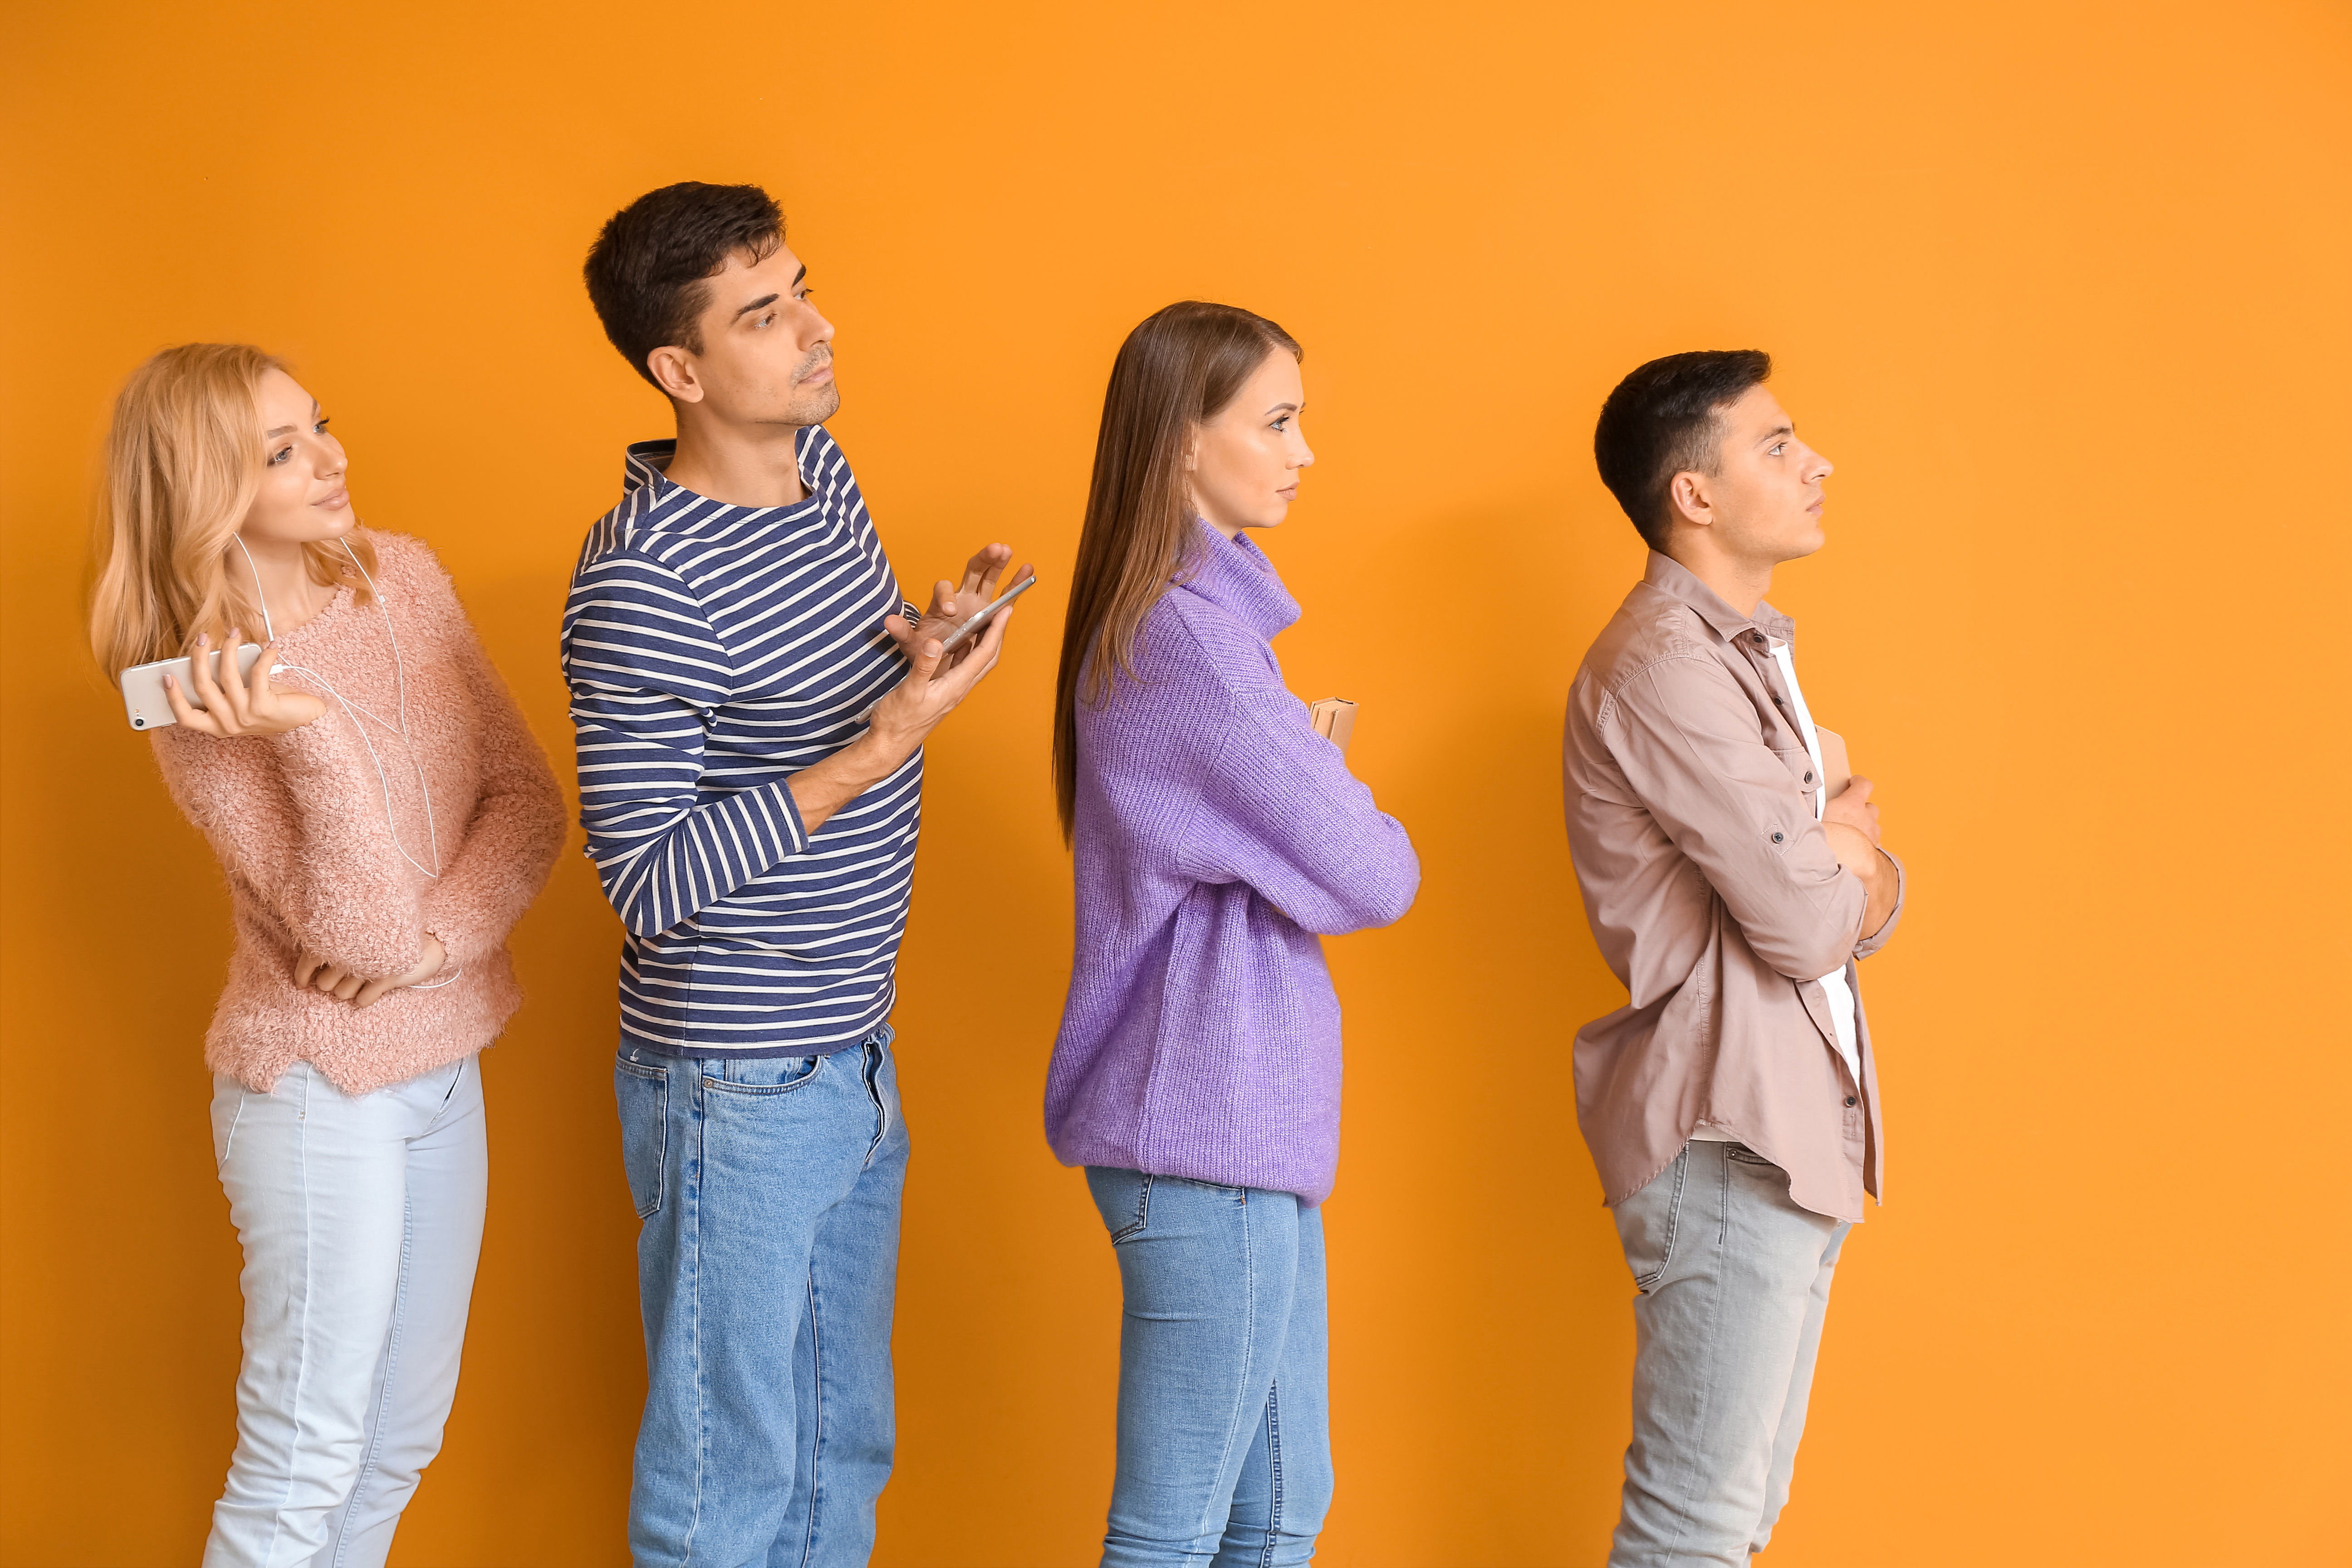 Young People Waiting in Line on Orange Background